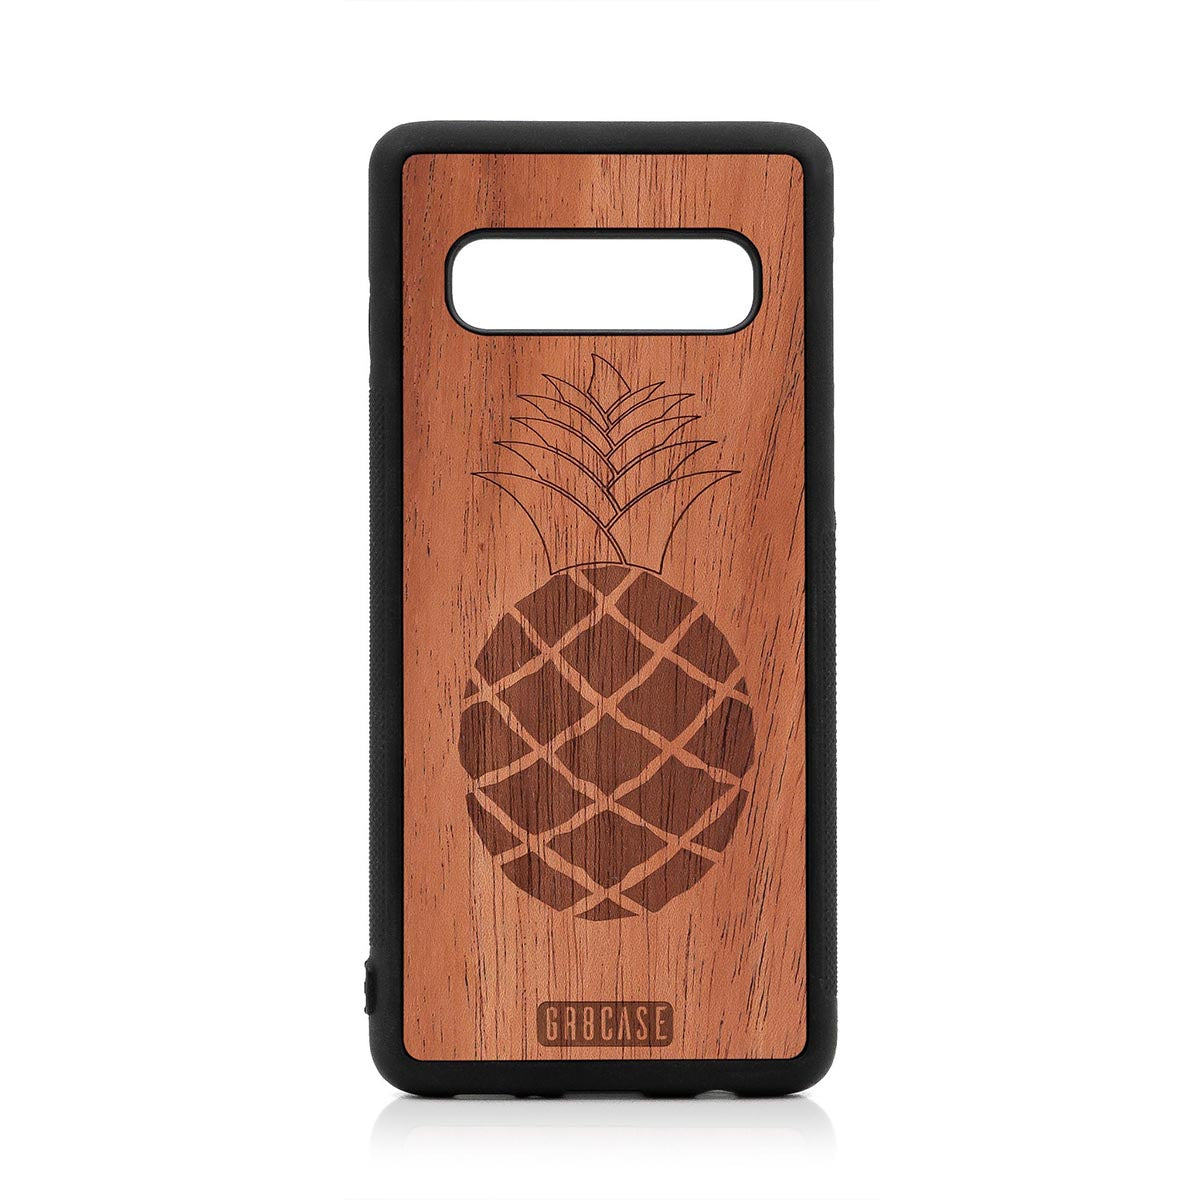 Pineapple Design Wood Case For Samsung Galaxy S10 by GR8CASE